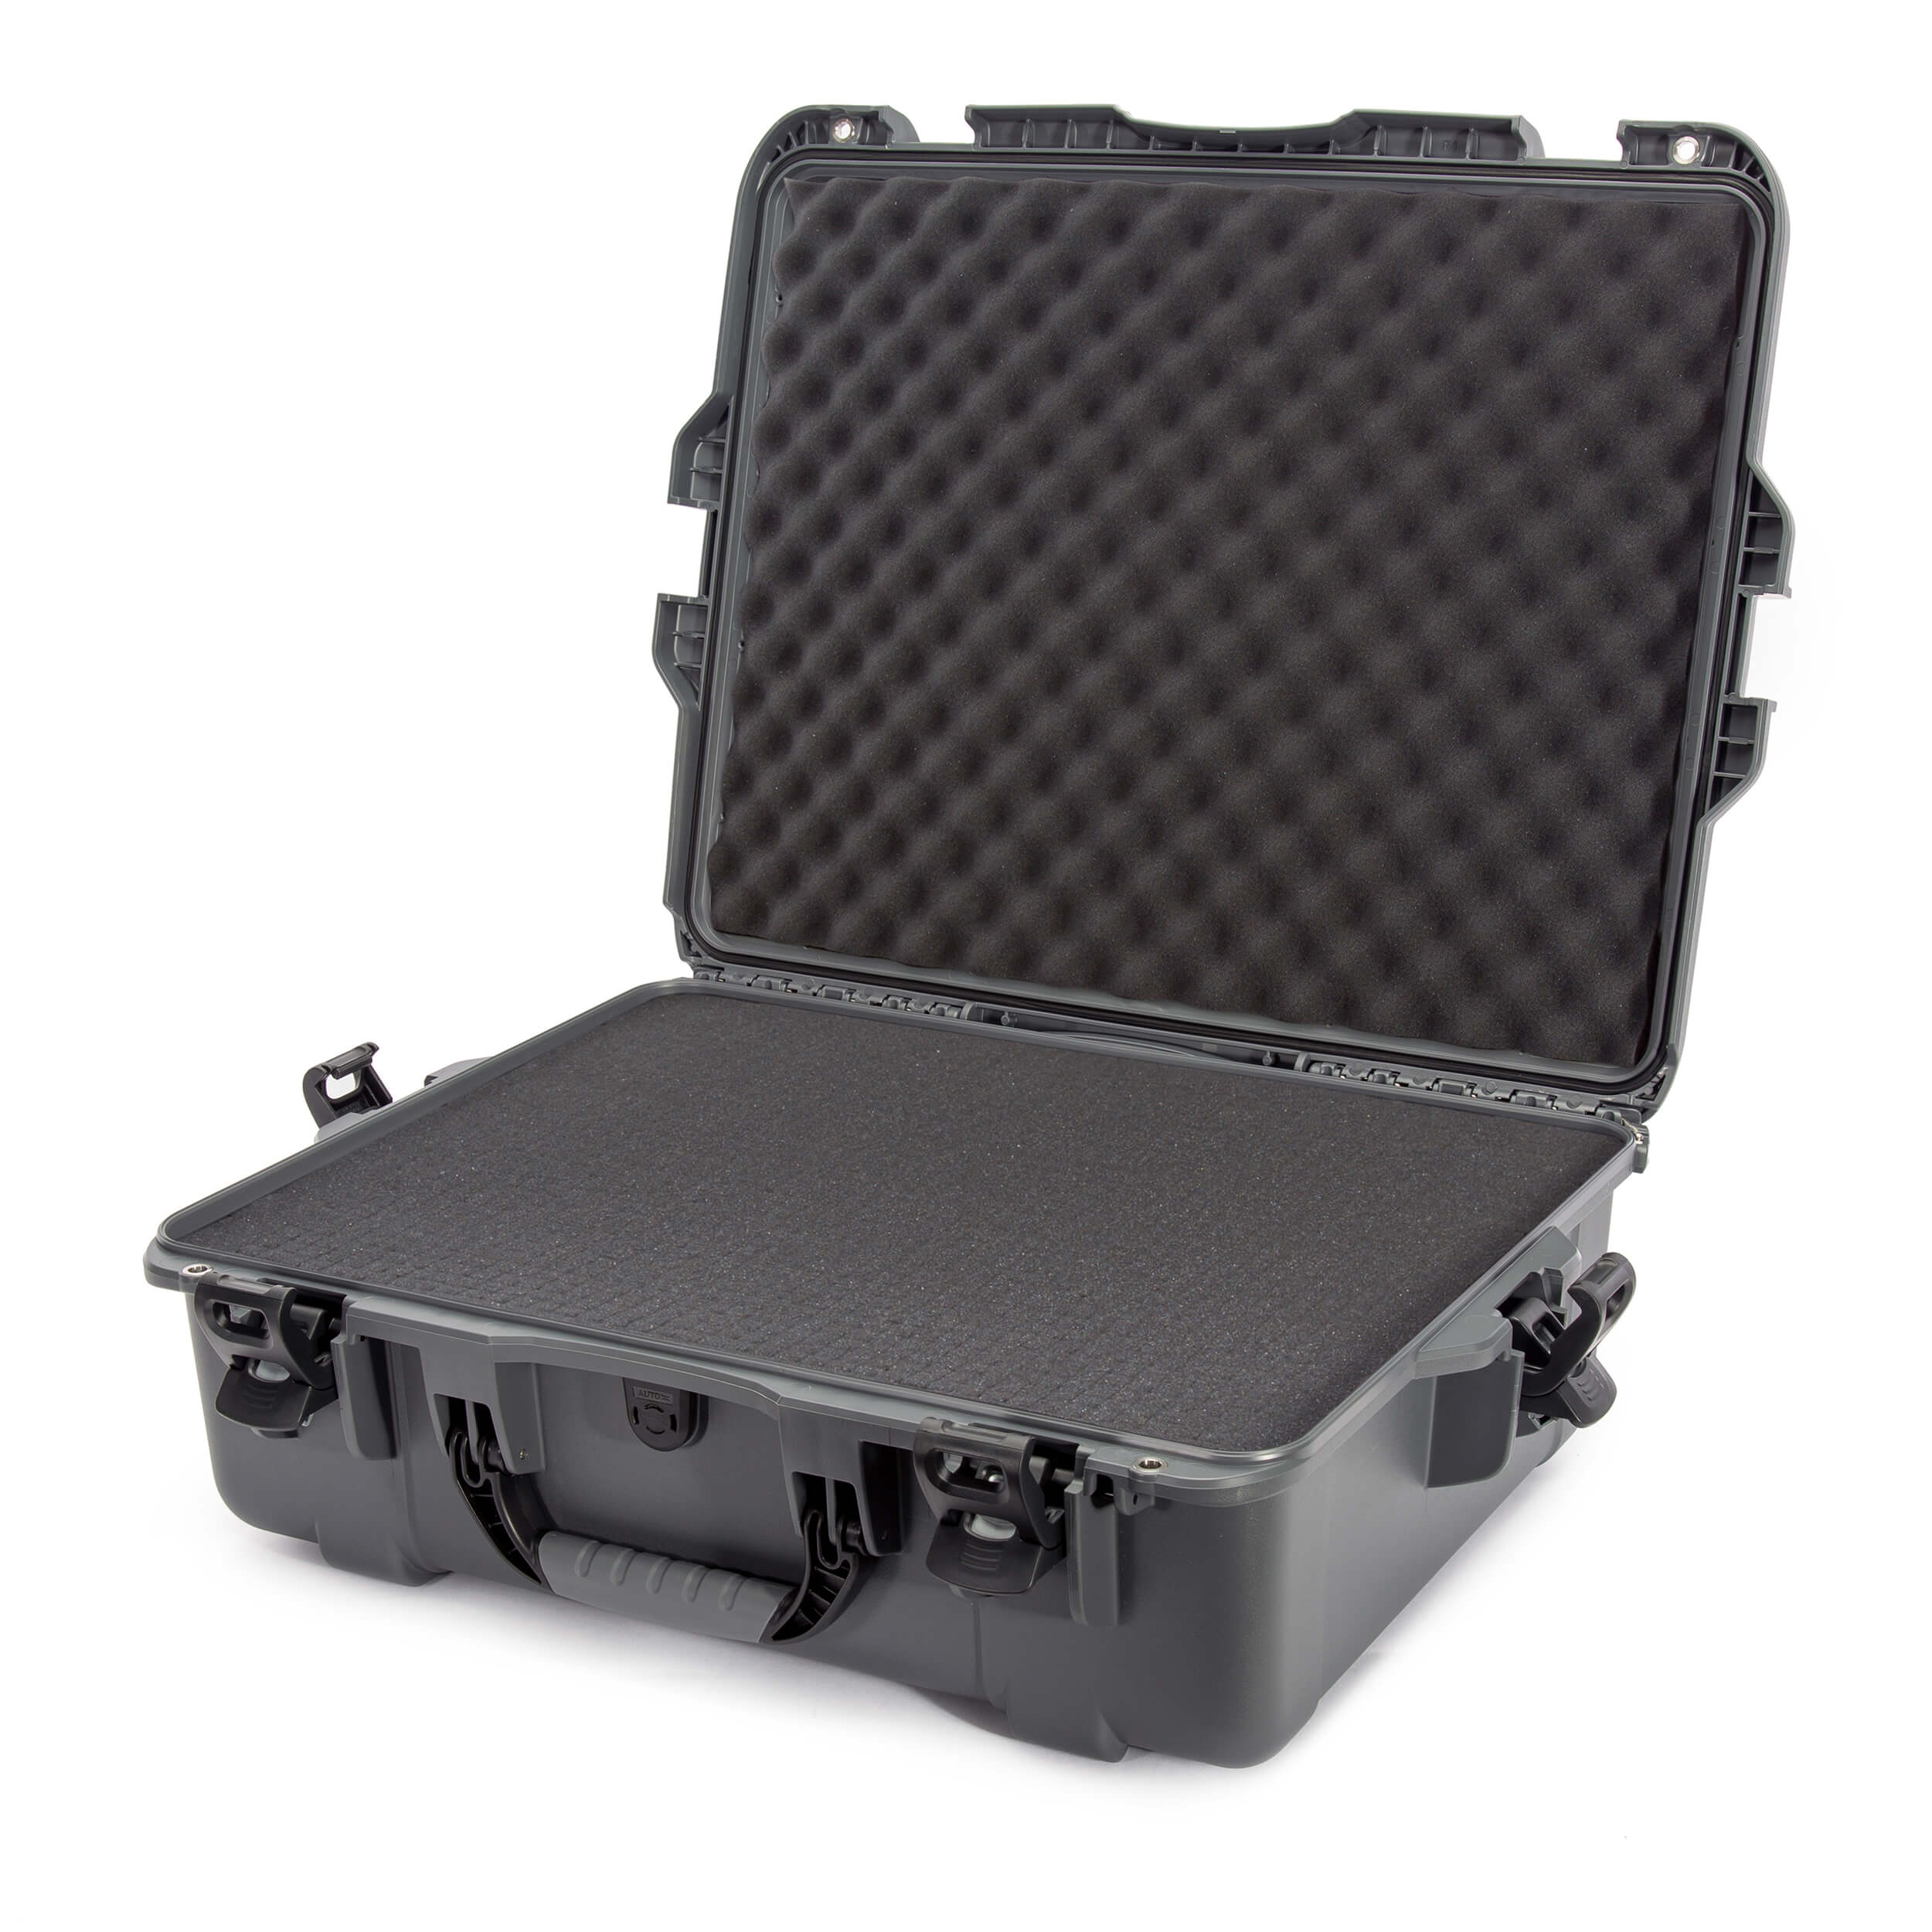 Condition 1 20” Large Hard Case Lockable Storage Box, Waterproof Tough  Plastic Case Dustproof Protective Luggage w/Customizable Foam for Camera